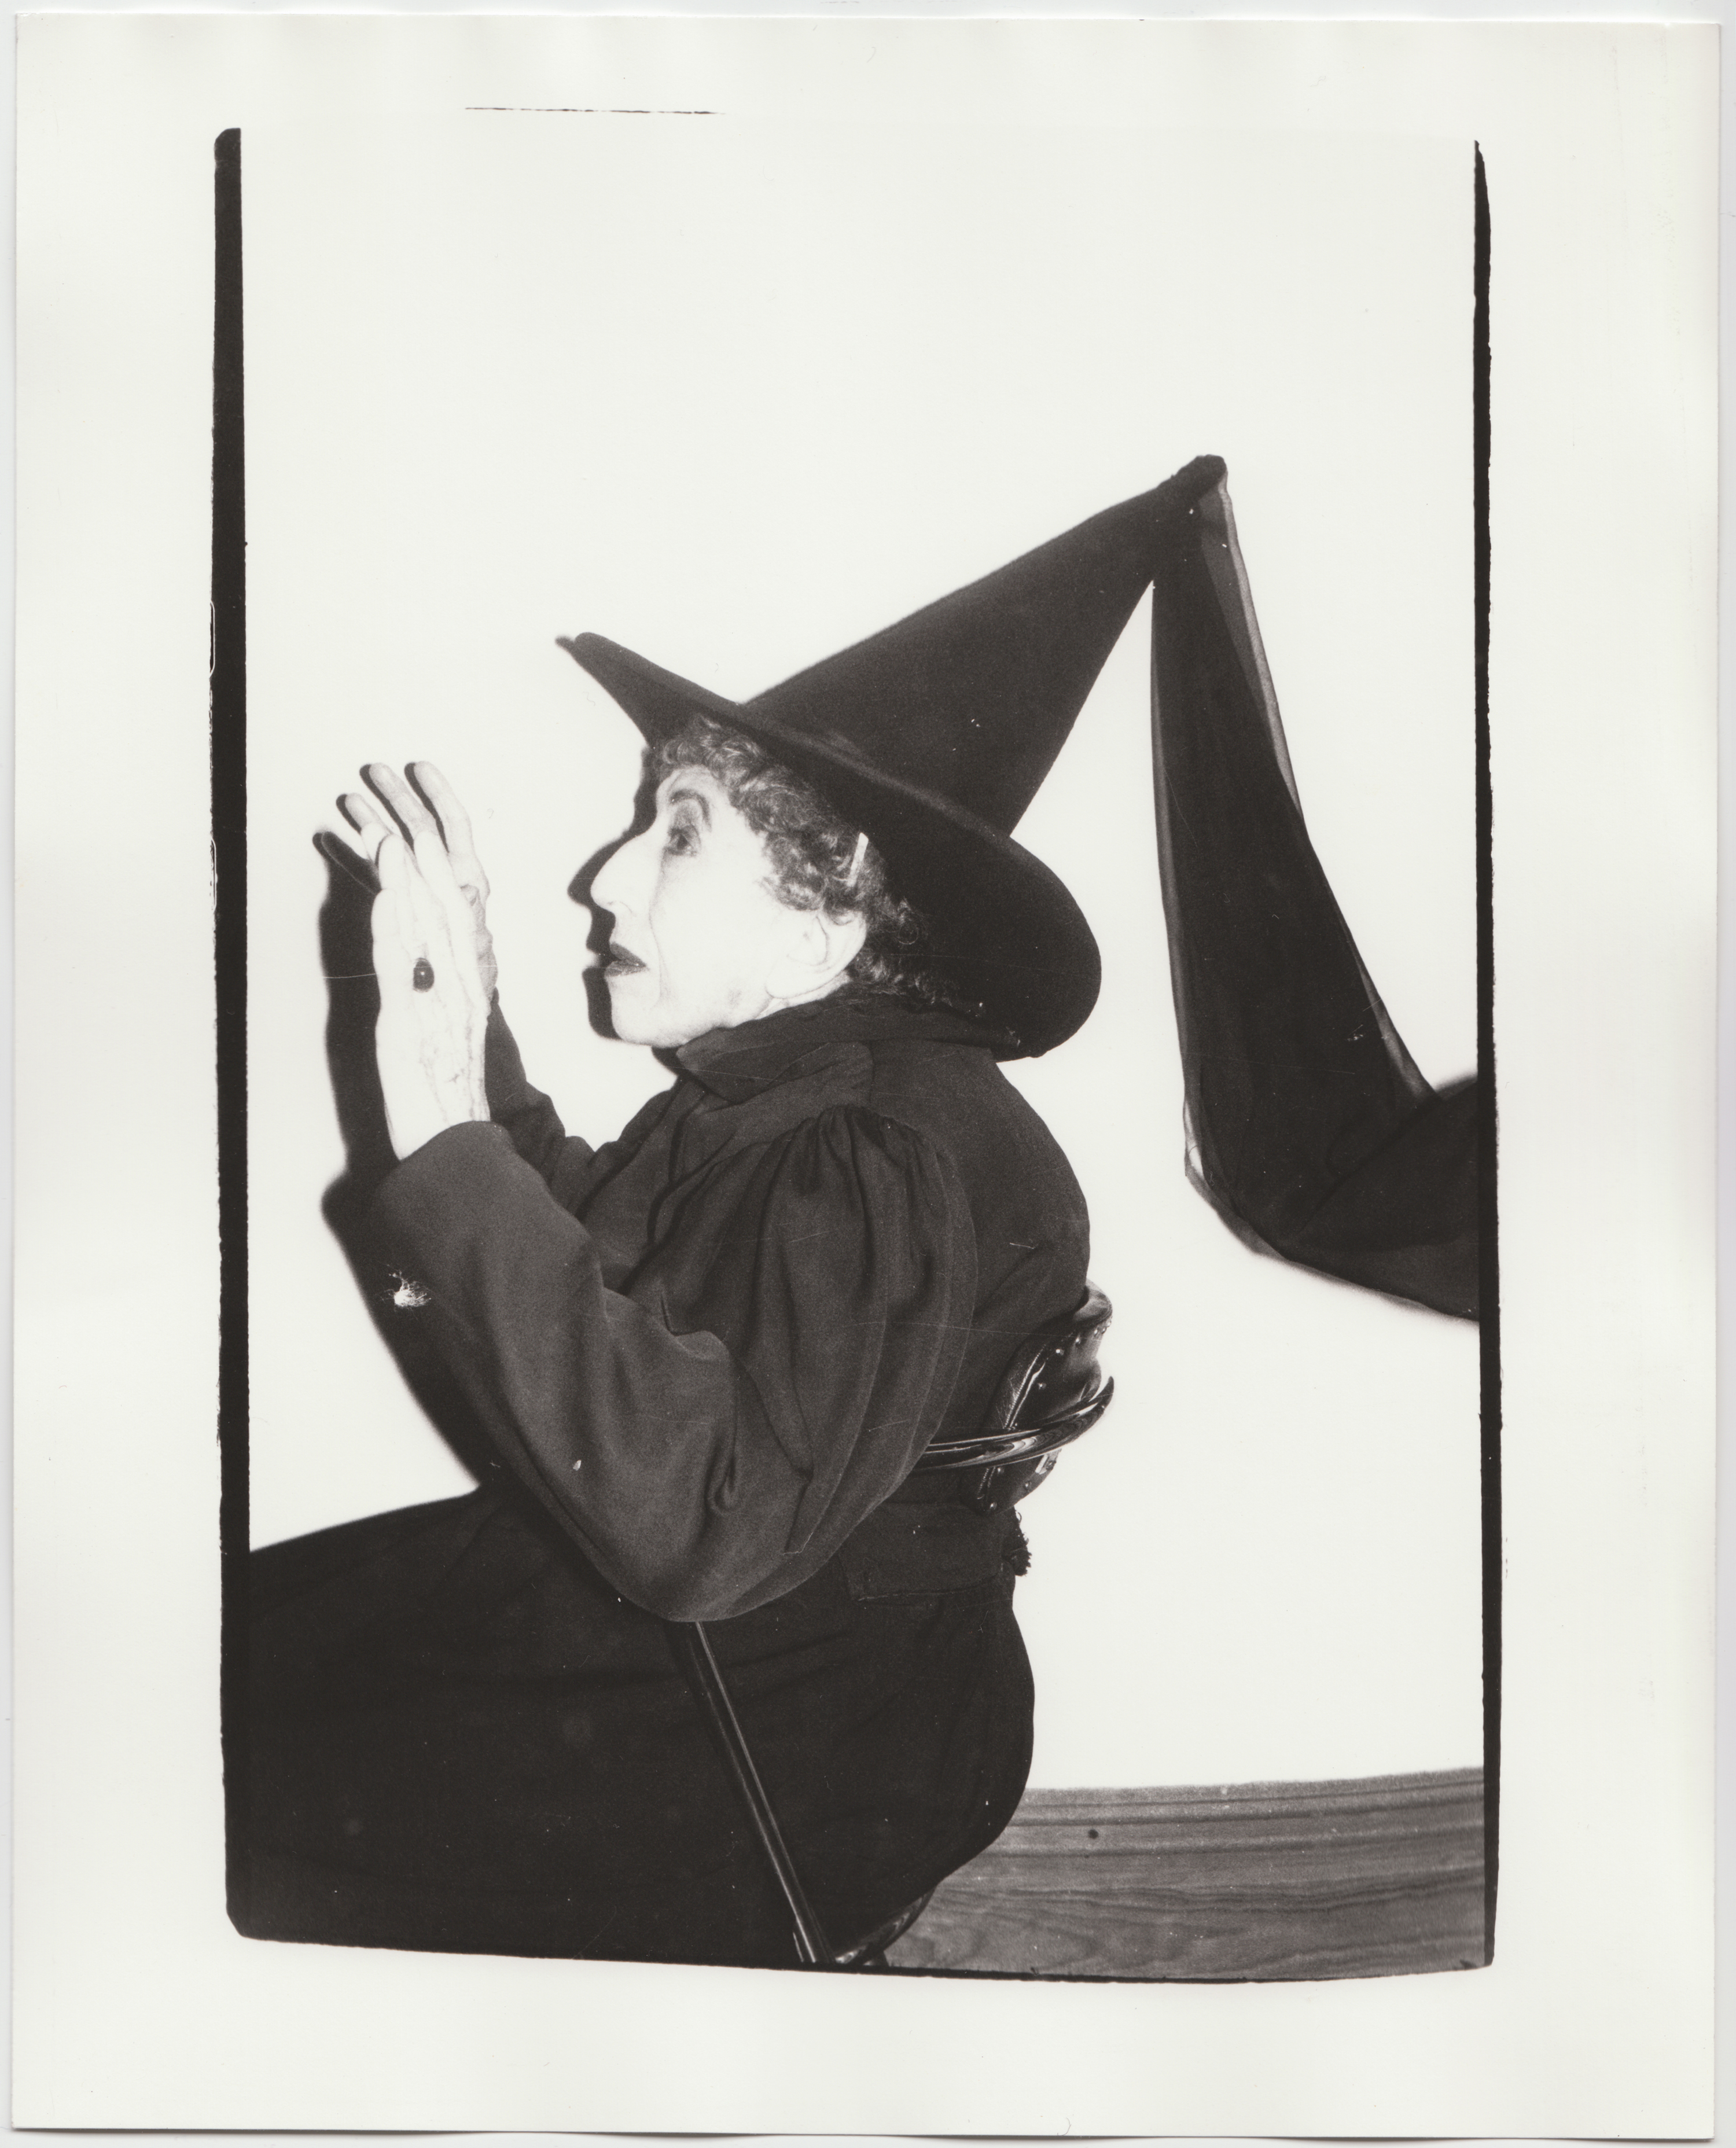 Margaret Hamilton dressed up as a witch with a pointy black hat and fabric flying off of her hat  behind her